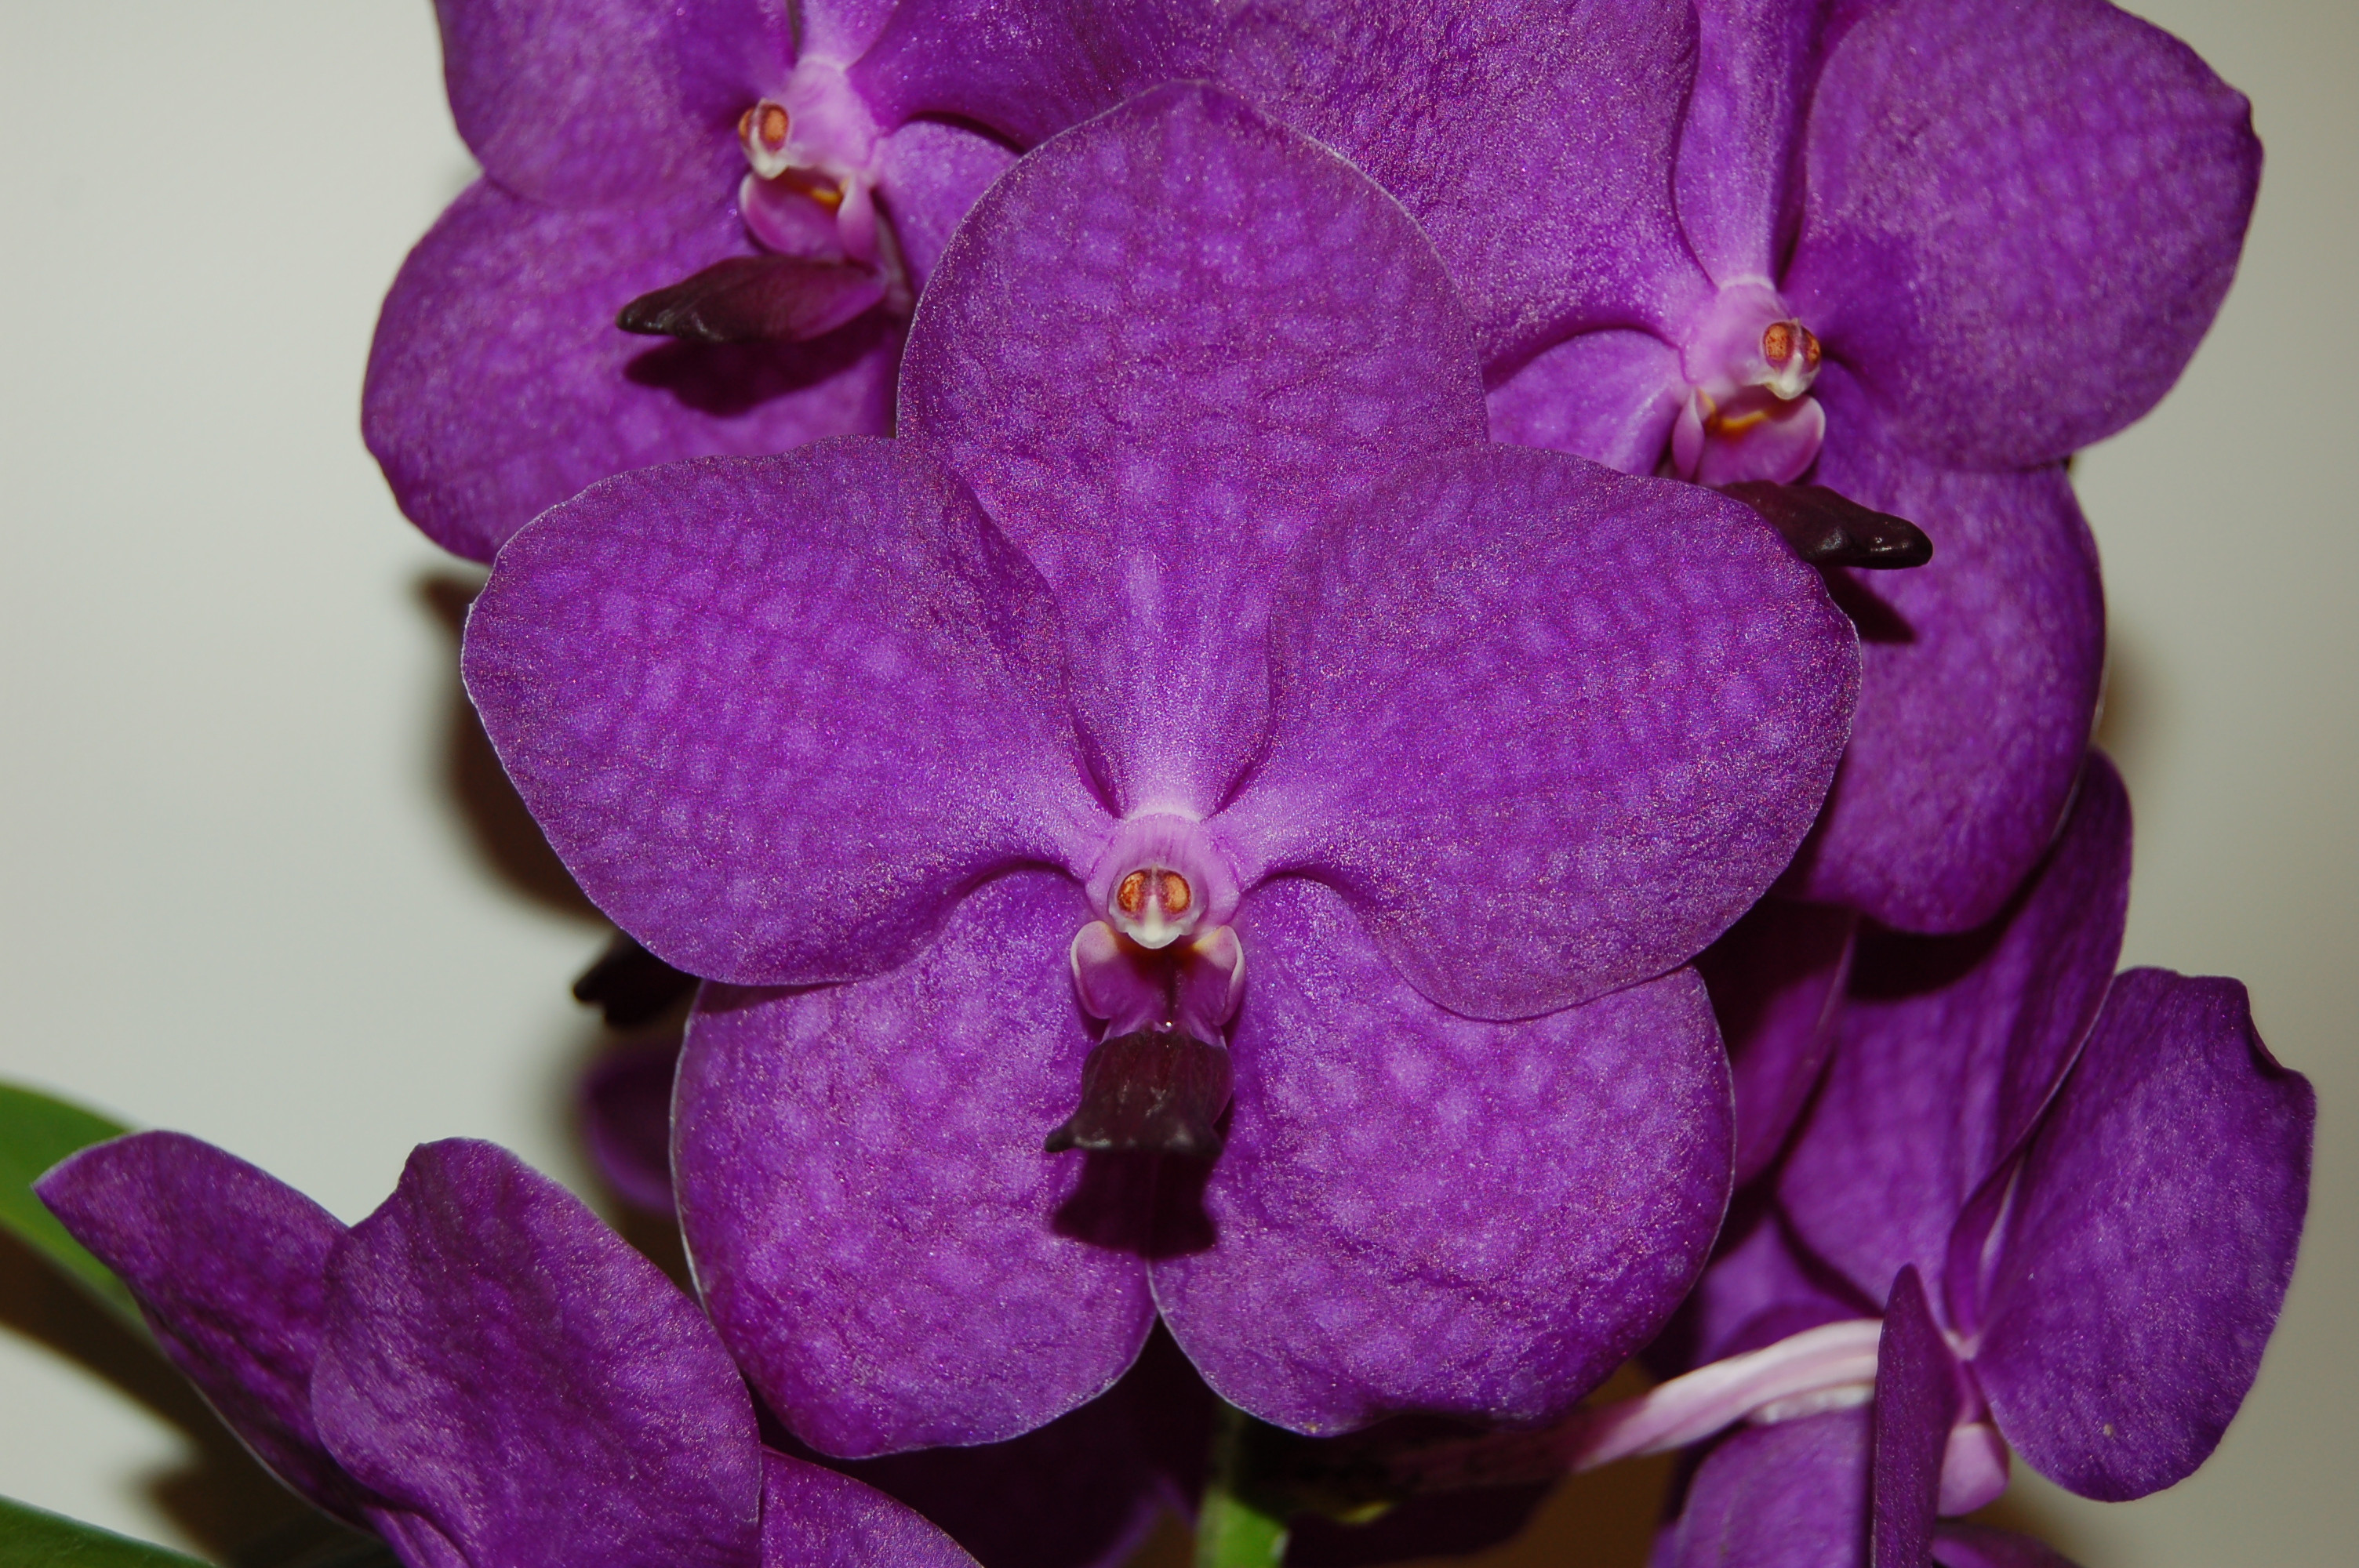 Vanda Violet Blue | Orchideen-Wichmann.de - Highest horticultural quality  and experience since 1897